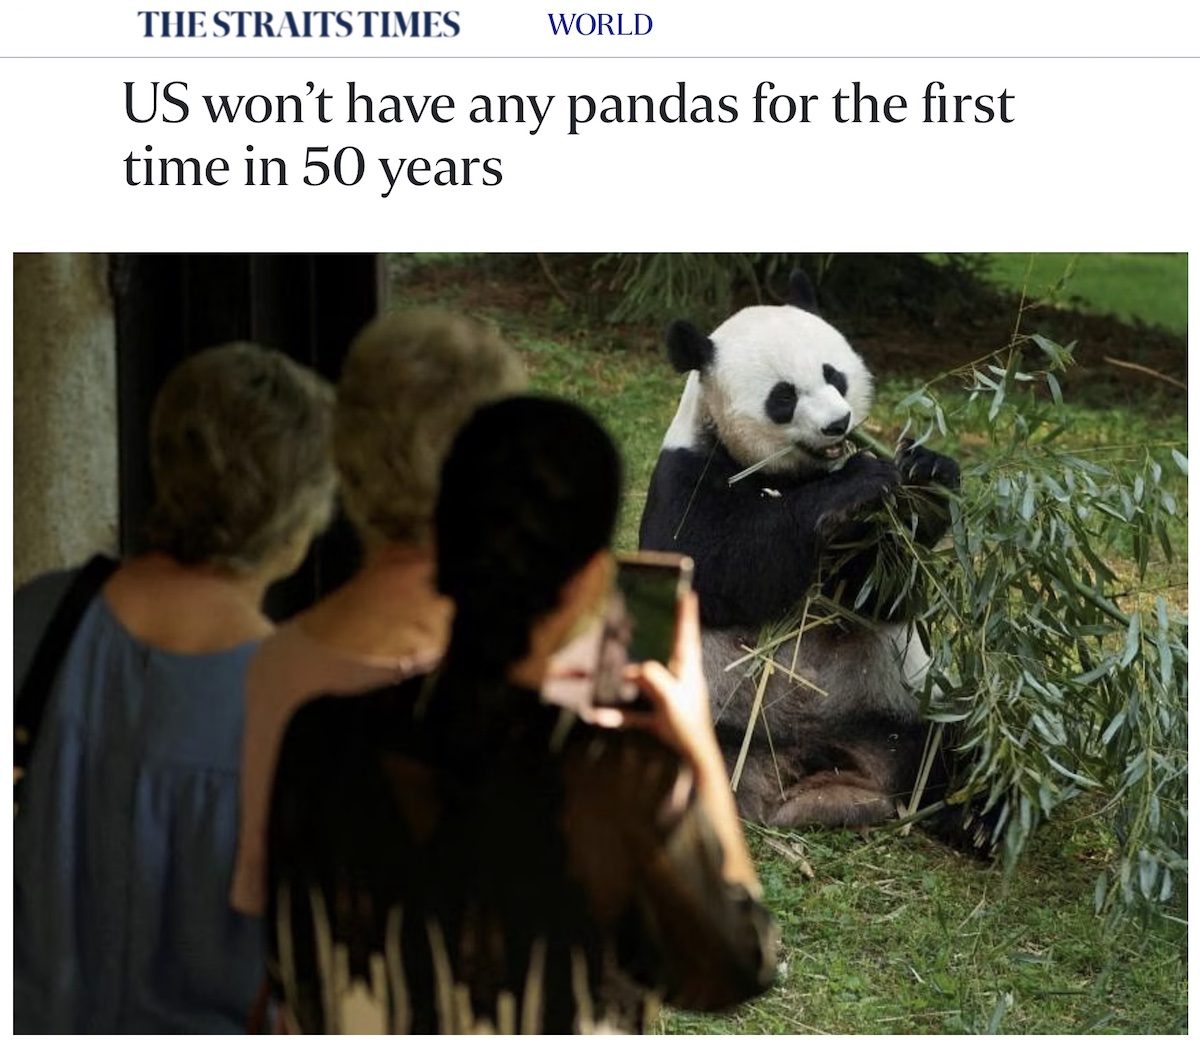 Panda and headline "US won't have any pandas for the first time in 50 years"